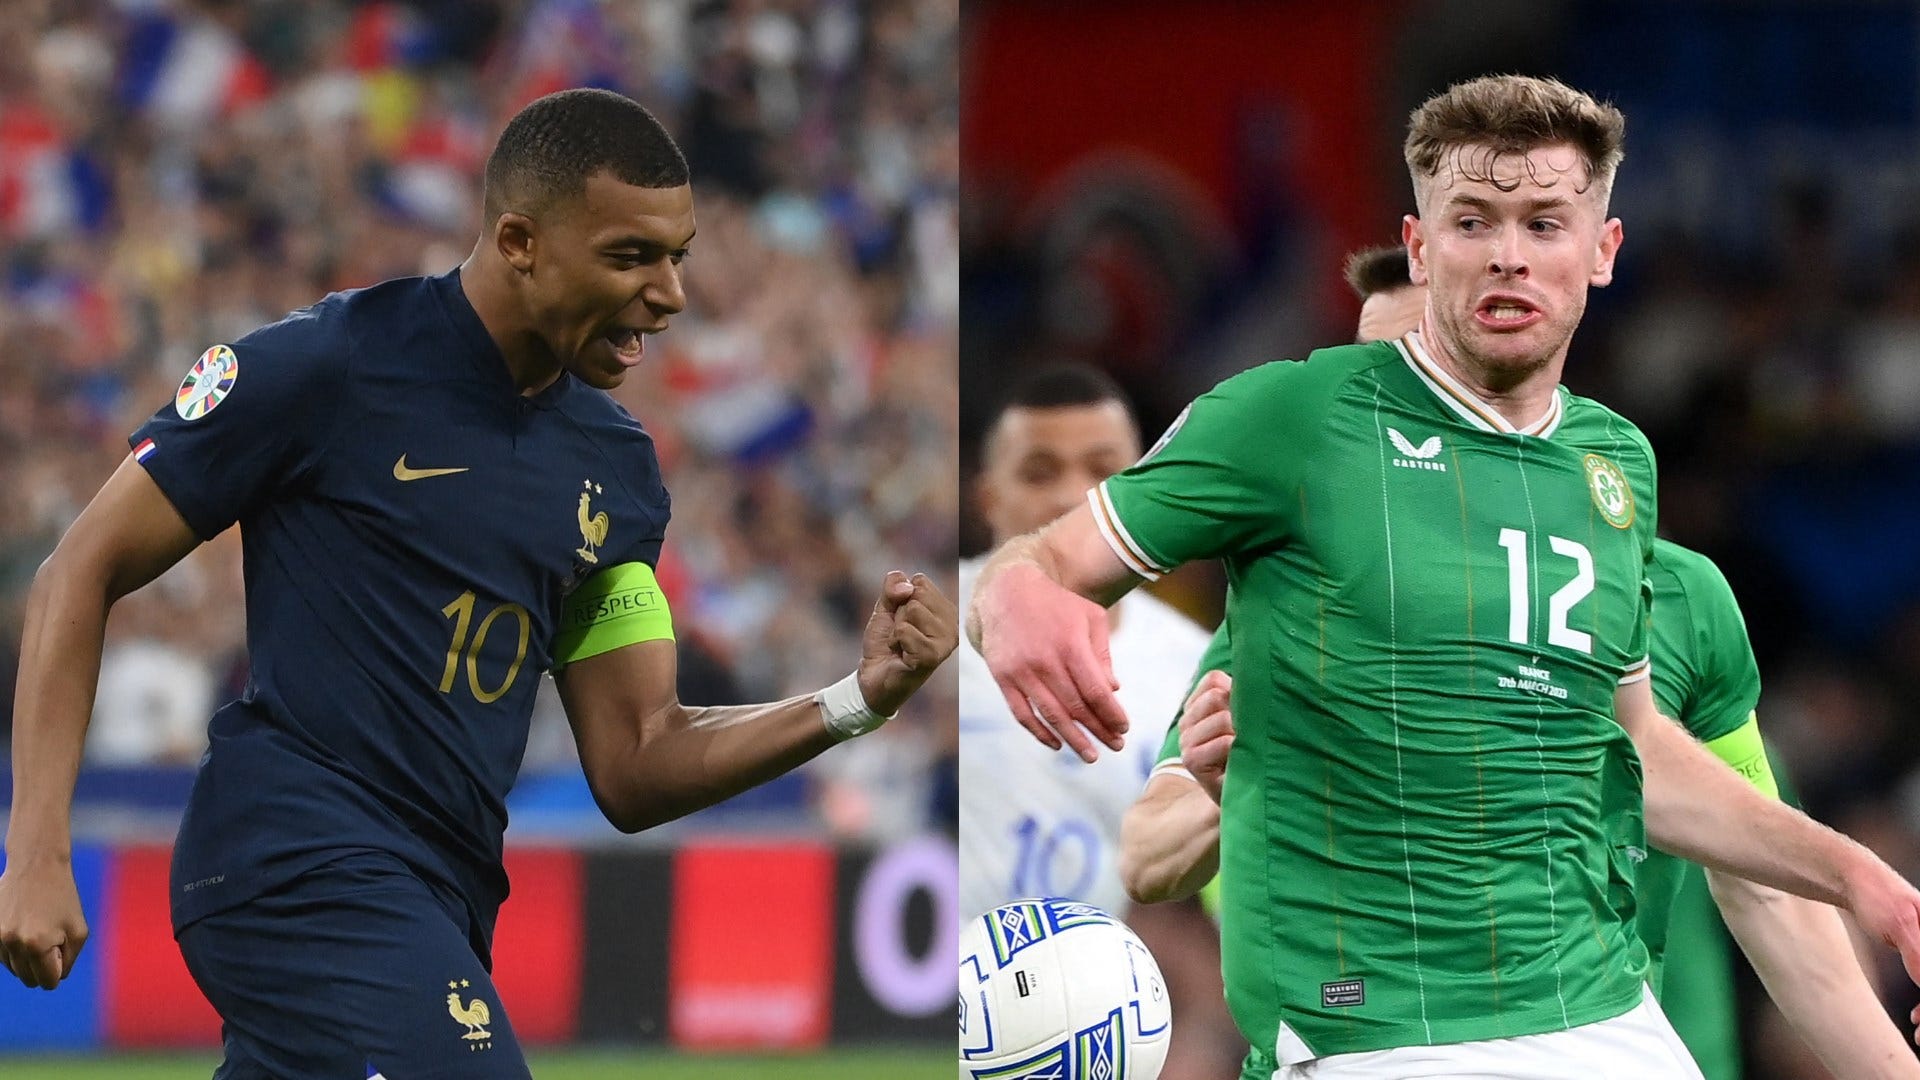 France vs Ireland Live stream, TV channel, kick-off time and where to watch Goal US